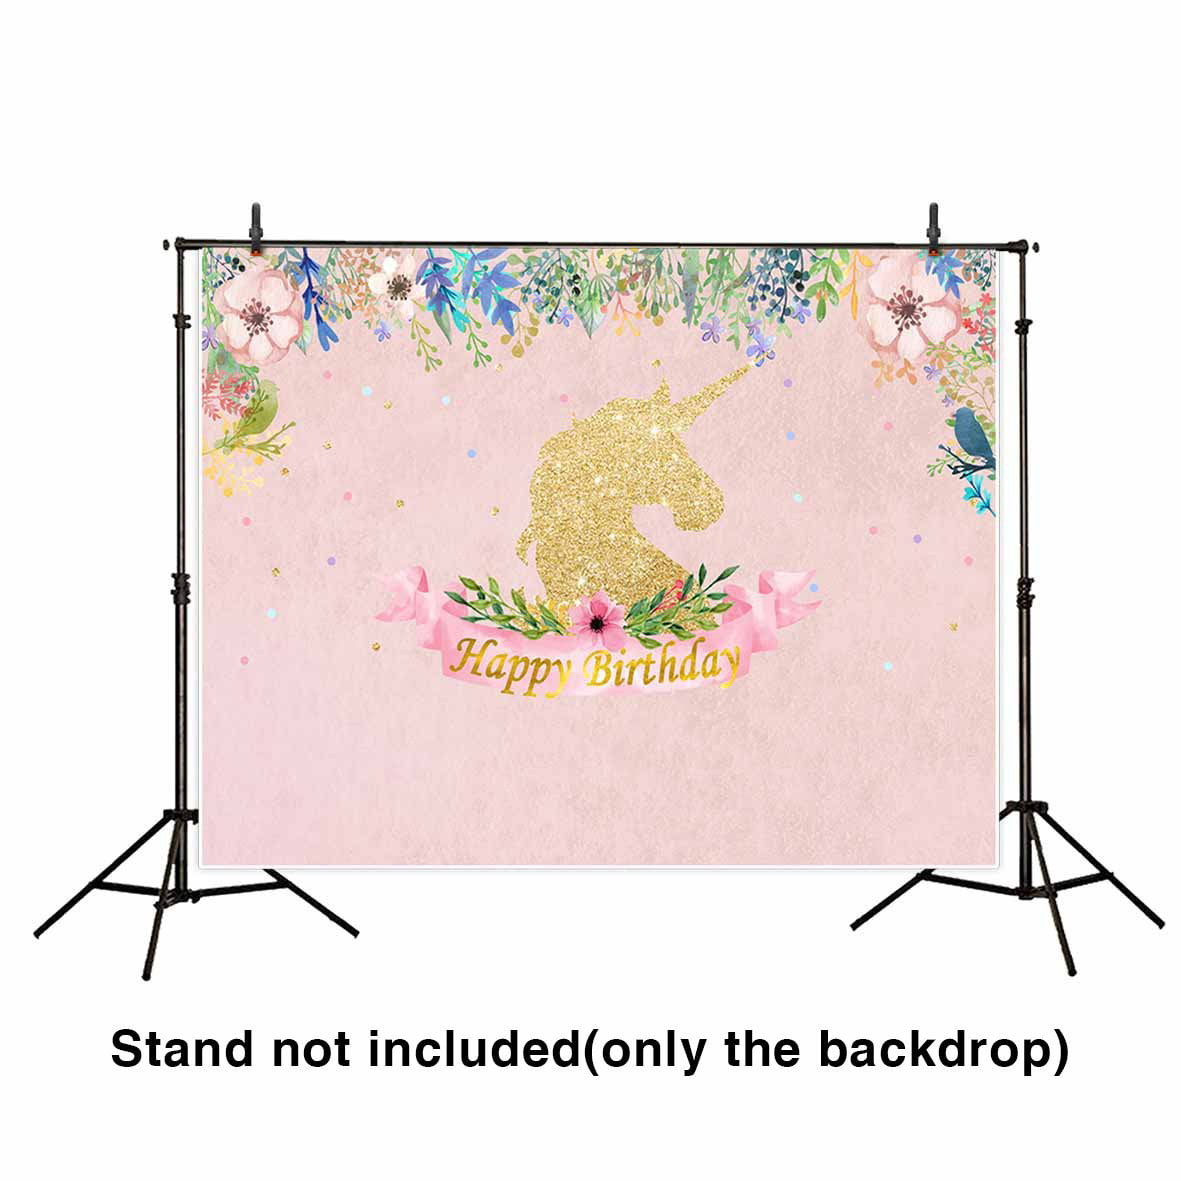 Watercolor Romantic Design Cartoon Like Sheep and Branches Florals Artful Print Background for Party Home Decor Outdoorsy Theme Vinyl Shoot Props Multicolor Modern 6x8 FT Photography Backdrop